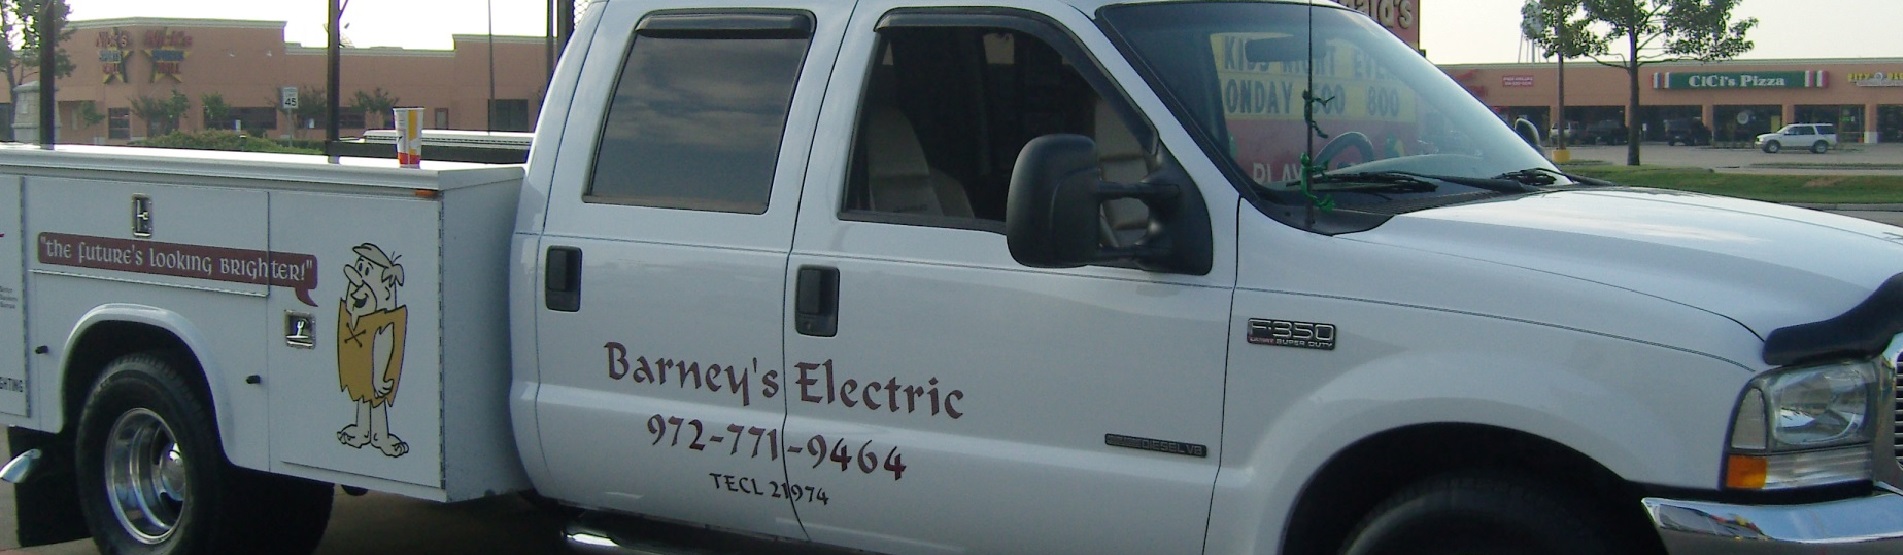 Electrician Lavon TX Barney's Electric Full Service Electrician Residential Commercial Retail and New Construction Wiring Repair Installation Service 24 Hour Emergency Services Master Electrician Rockwall Texas